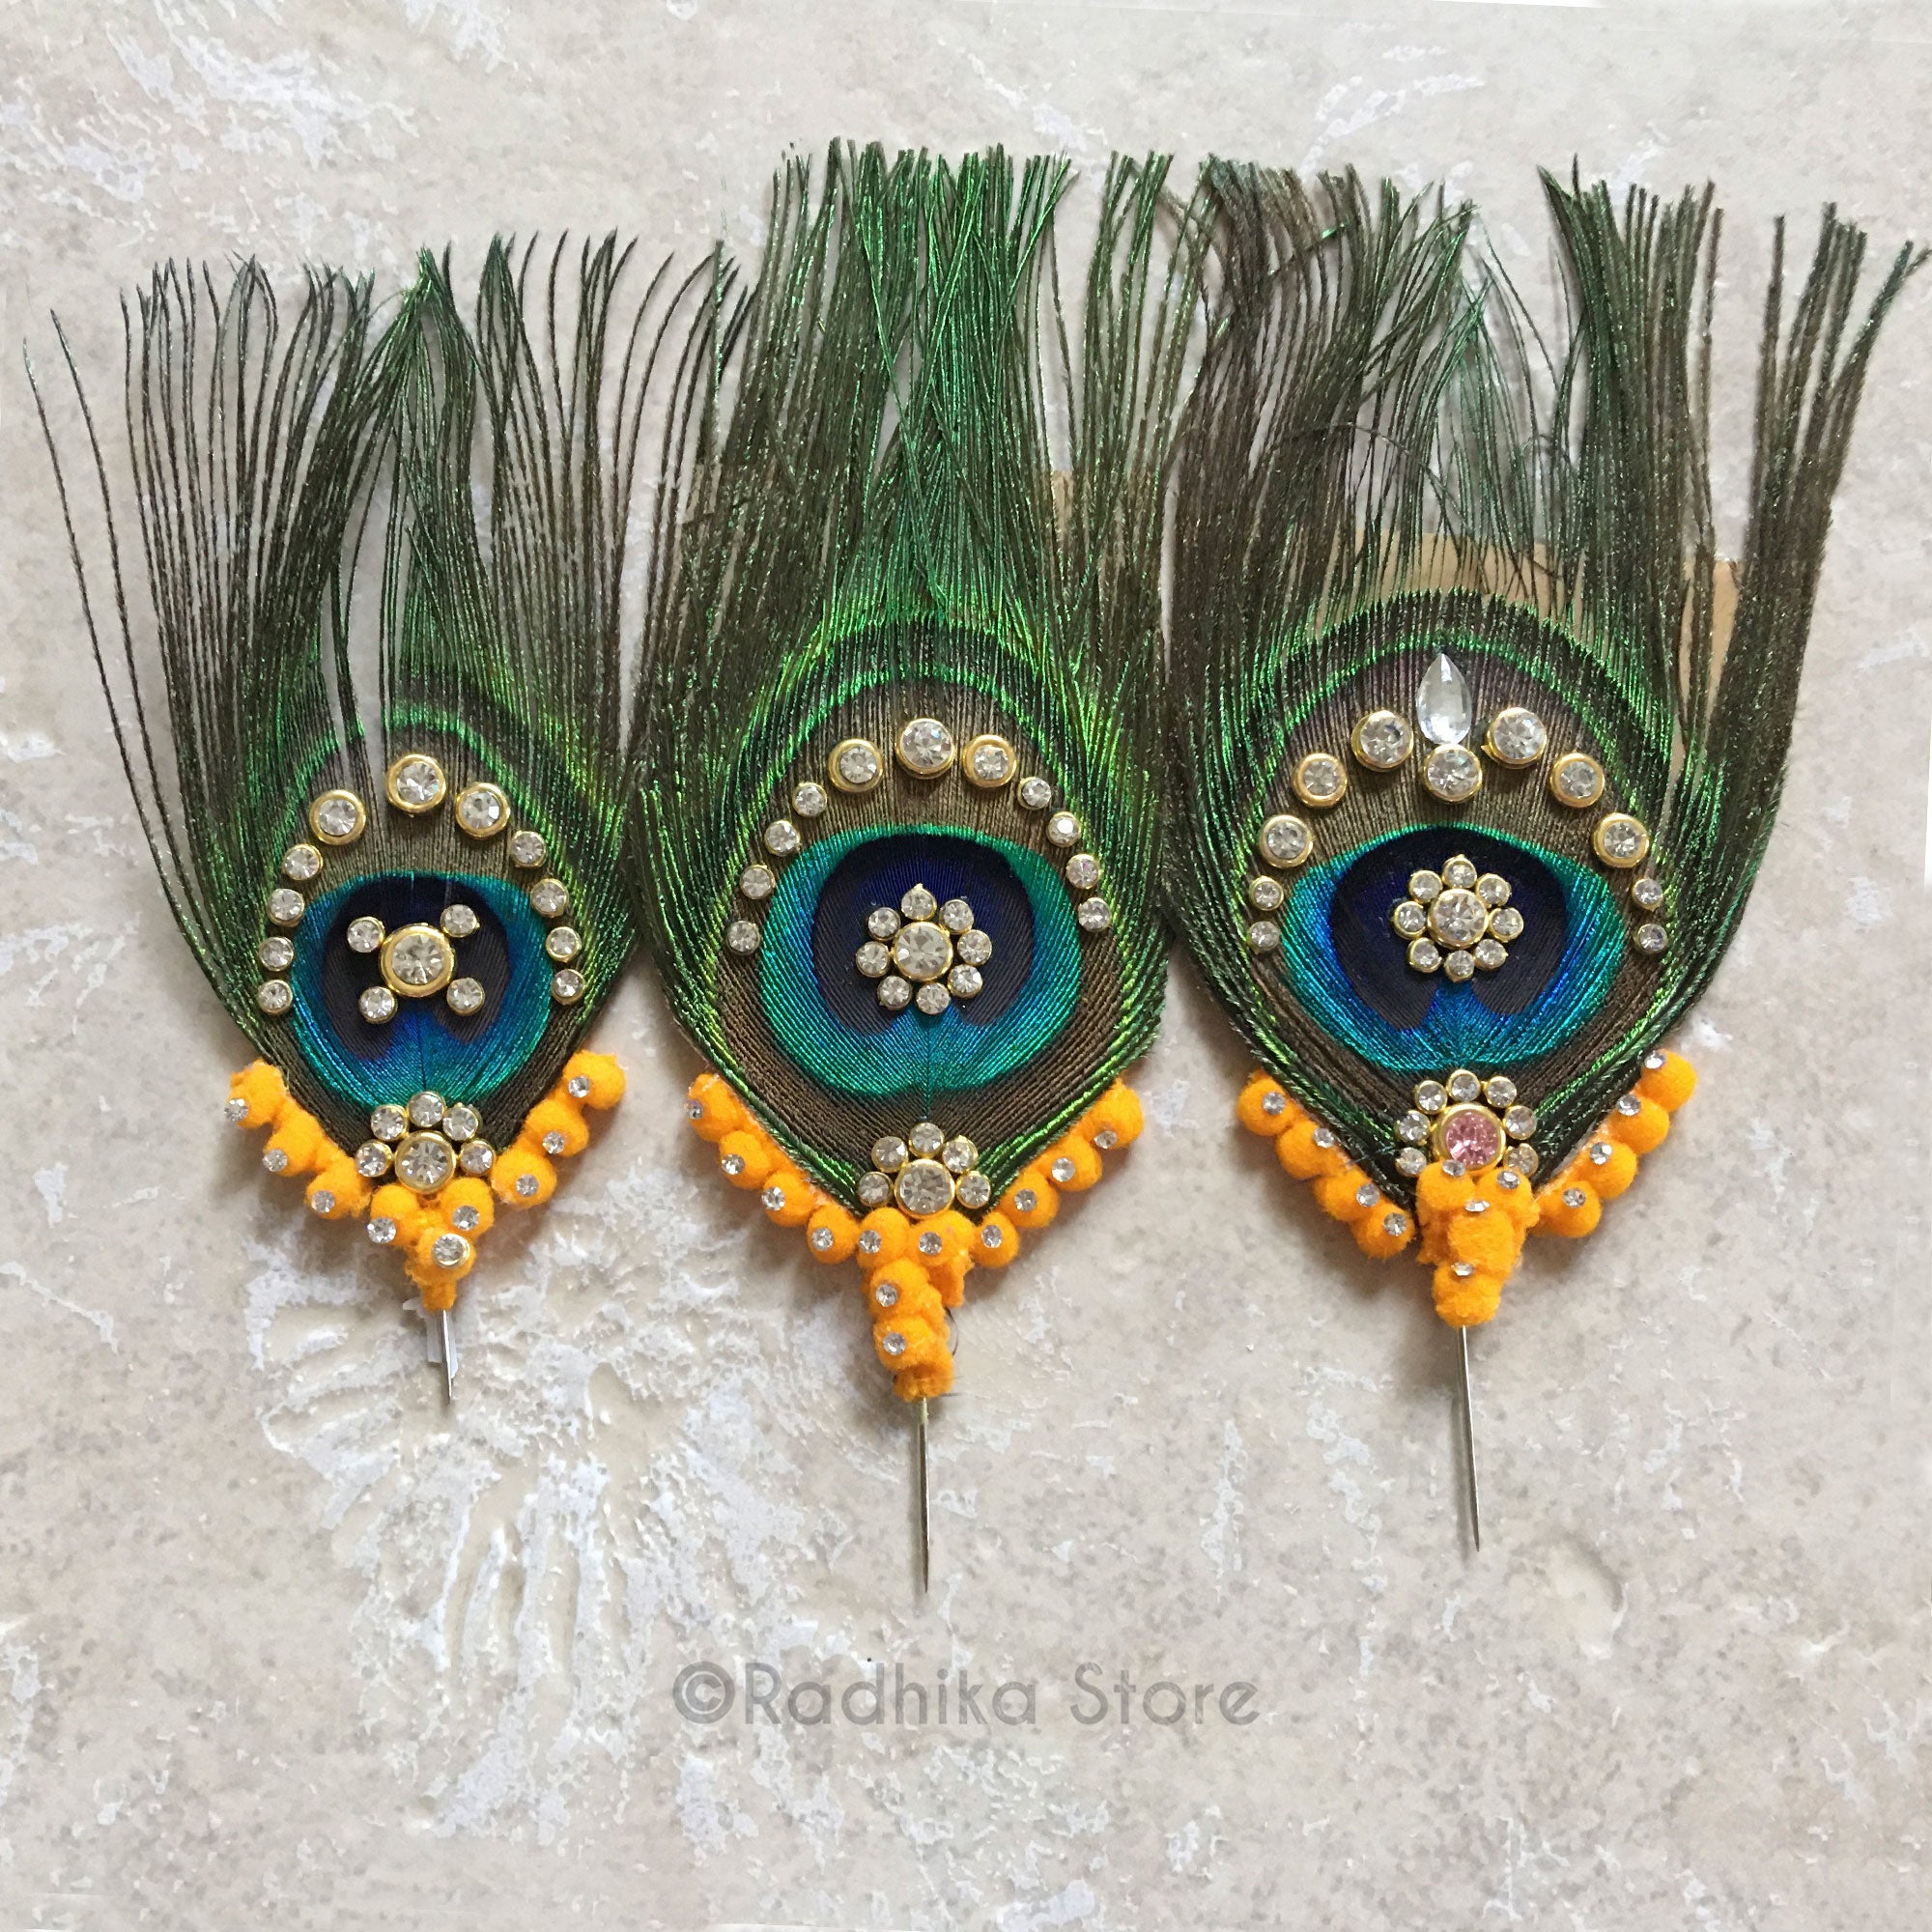 Extra Large Crystal Peacock Feathers -Marigold Color